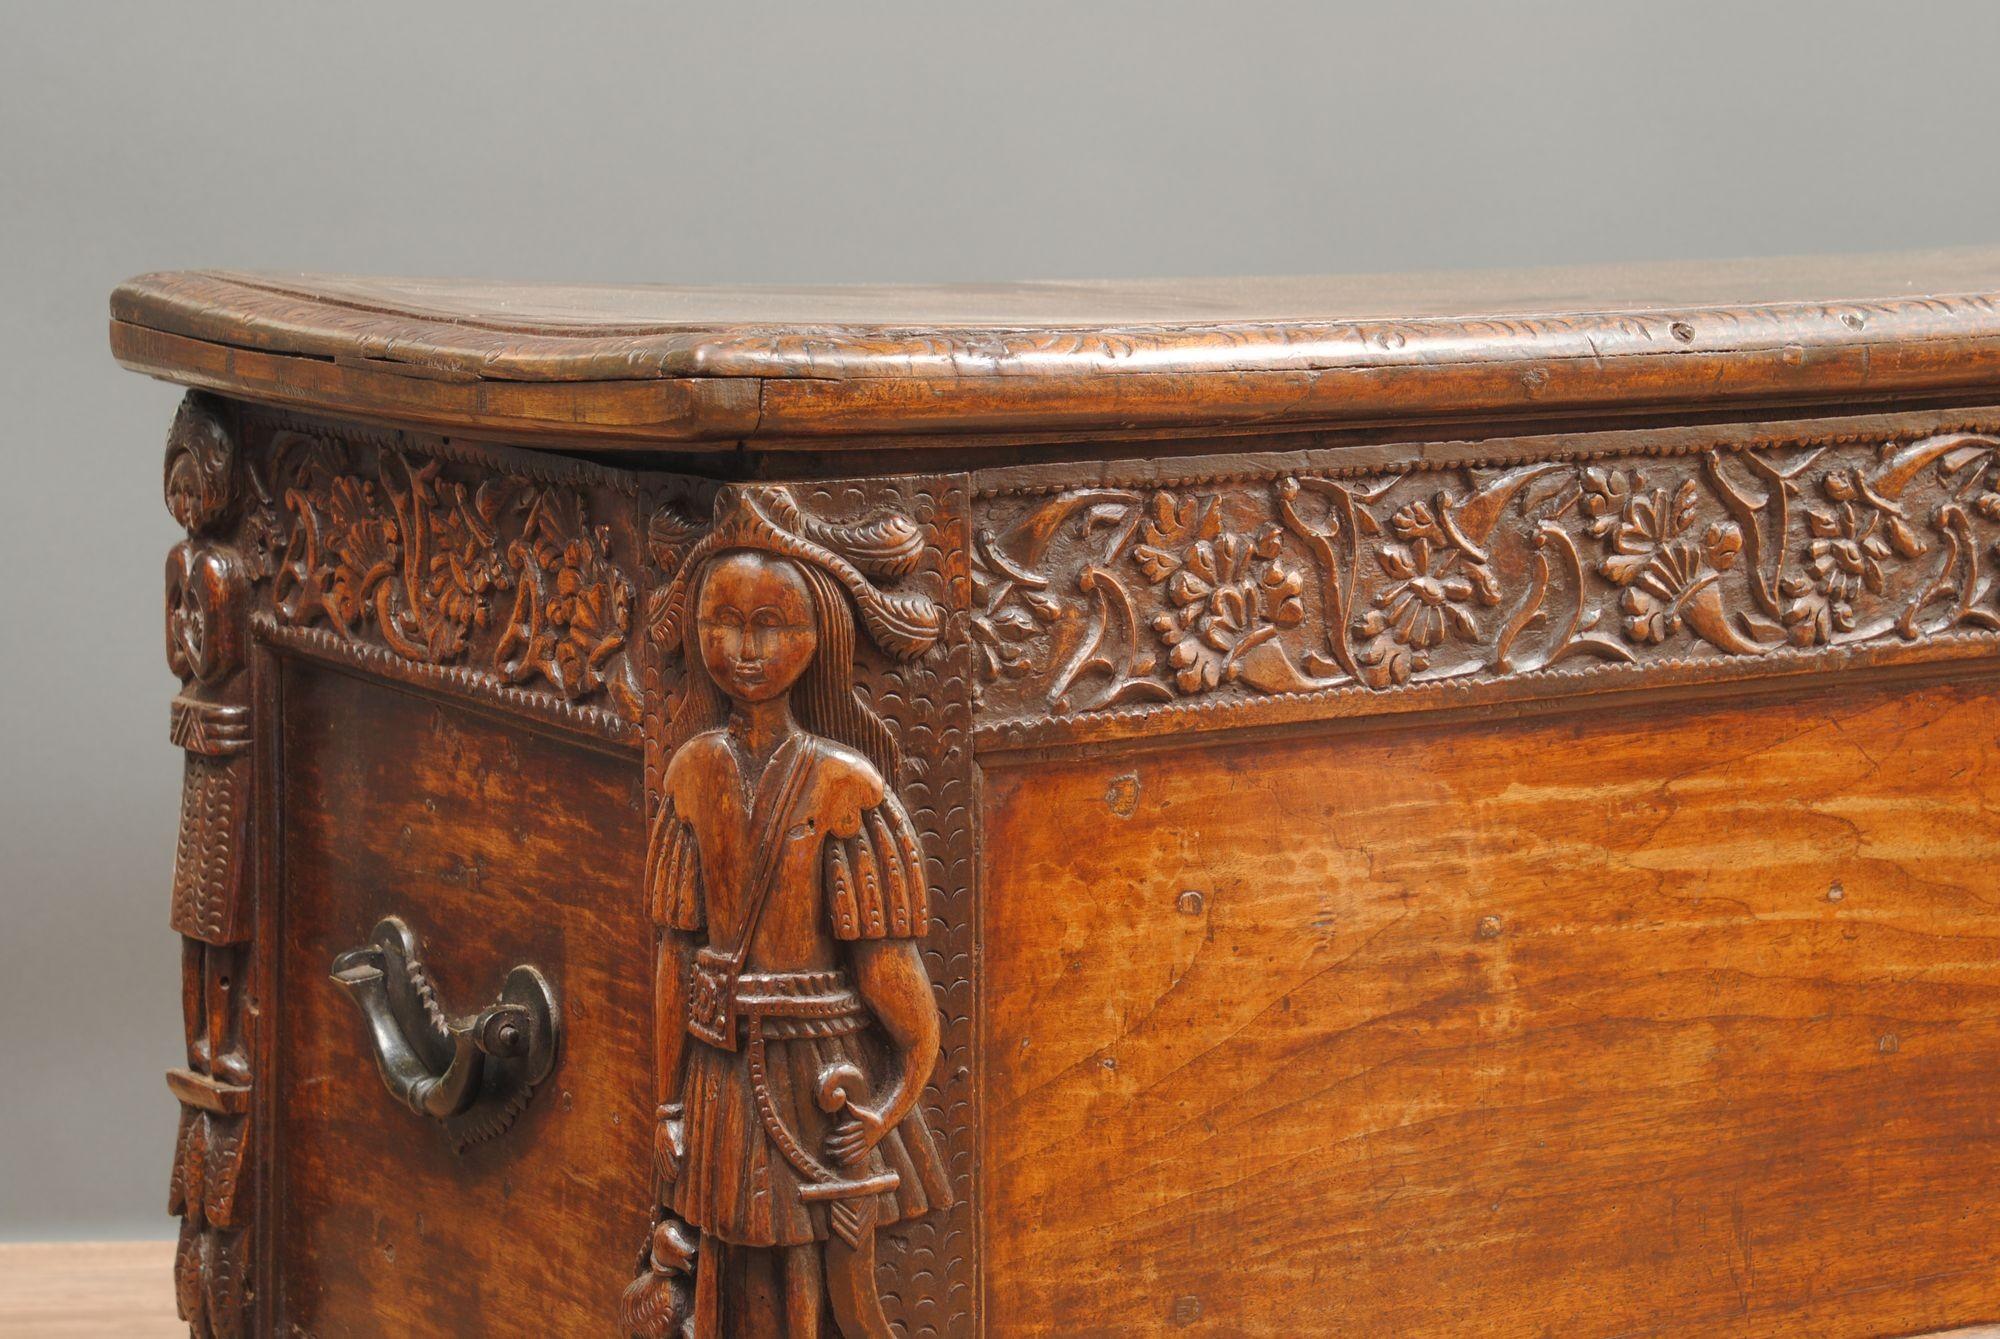 17th Century A Rare Spanish Colonial Carved Coffer For Sale